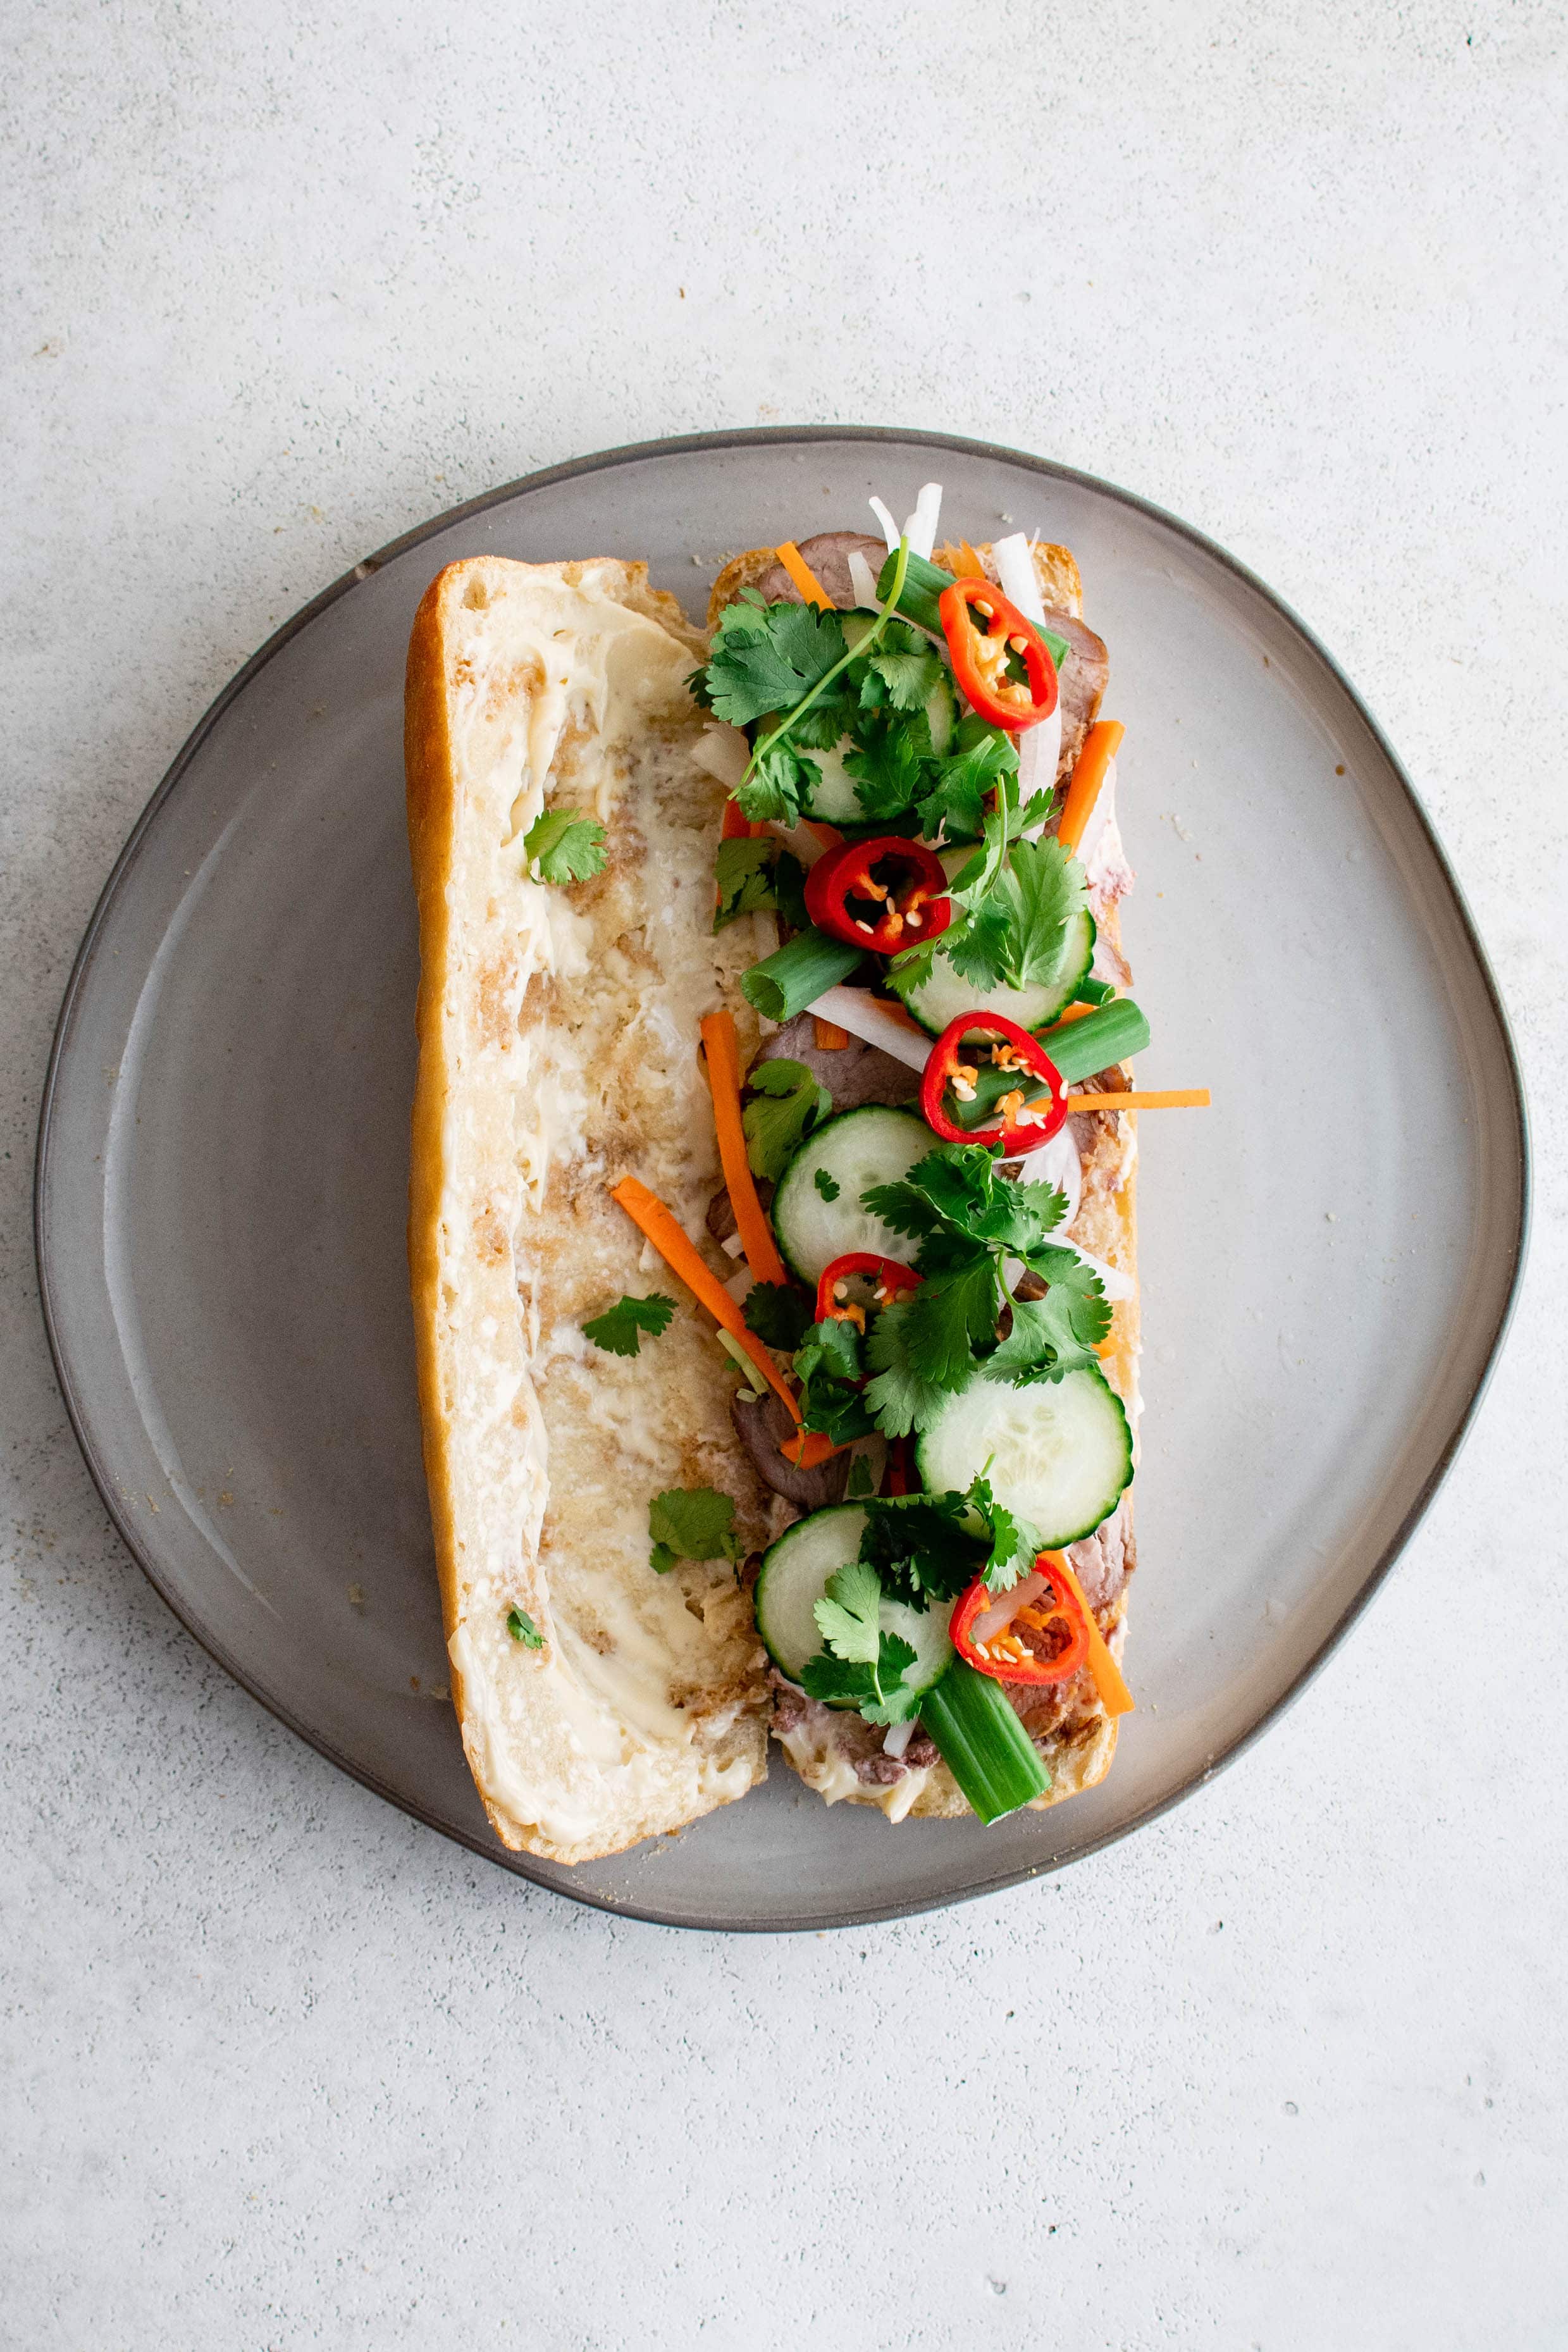 One French baguette on a plate cut in half lengthwise with one half topped with thinly sliced pork tenderloin, pickled radish and carrots, green onions, cucumber, and cilantro.